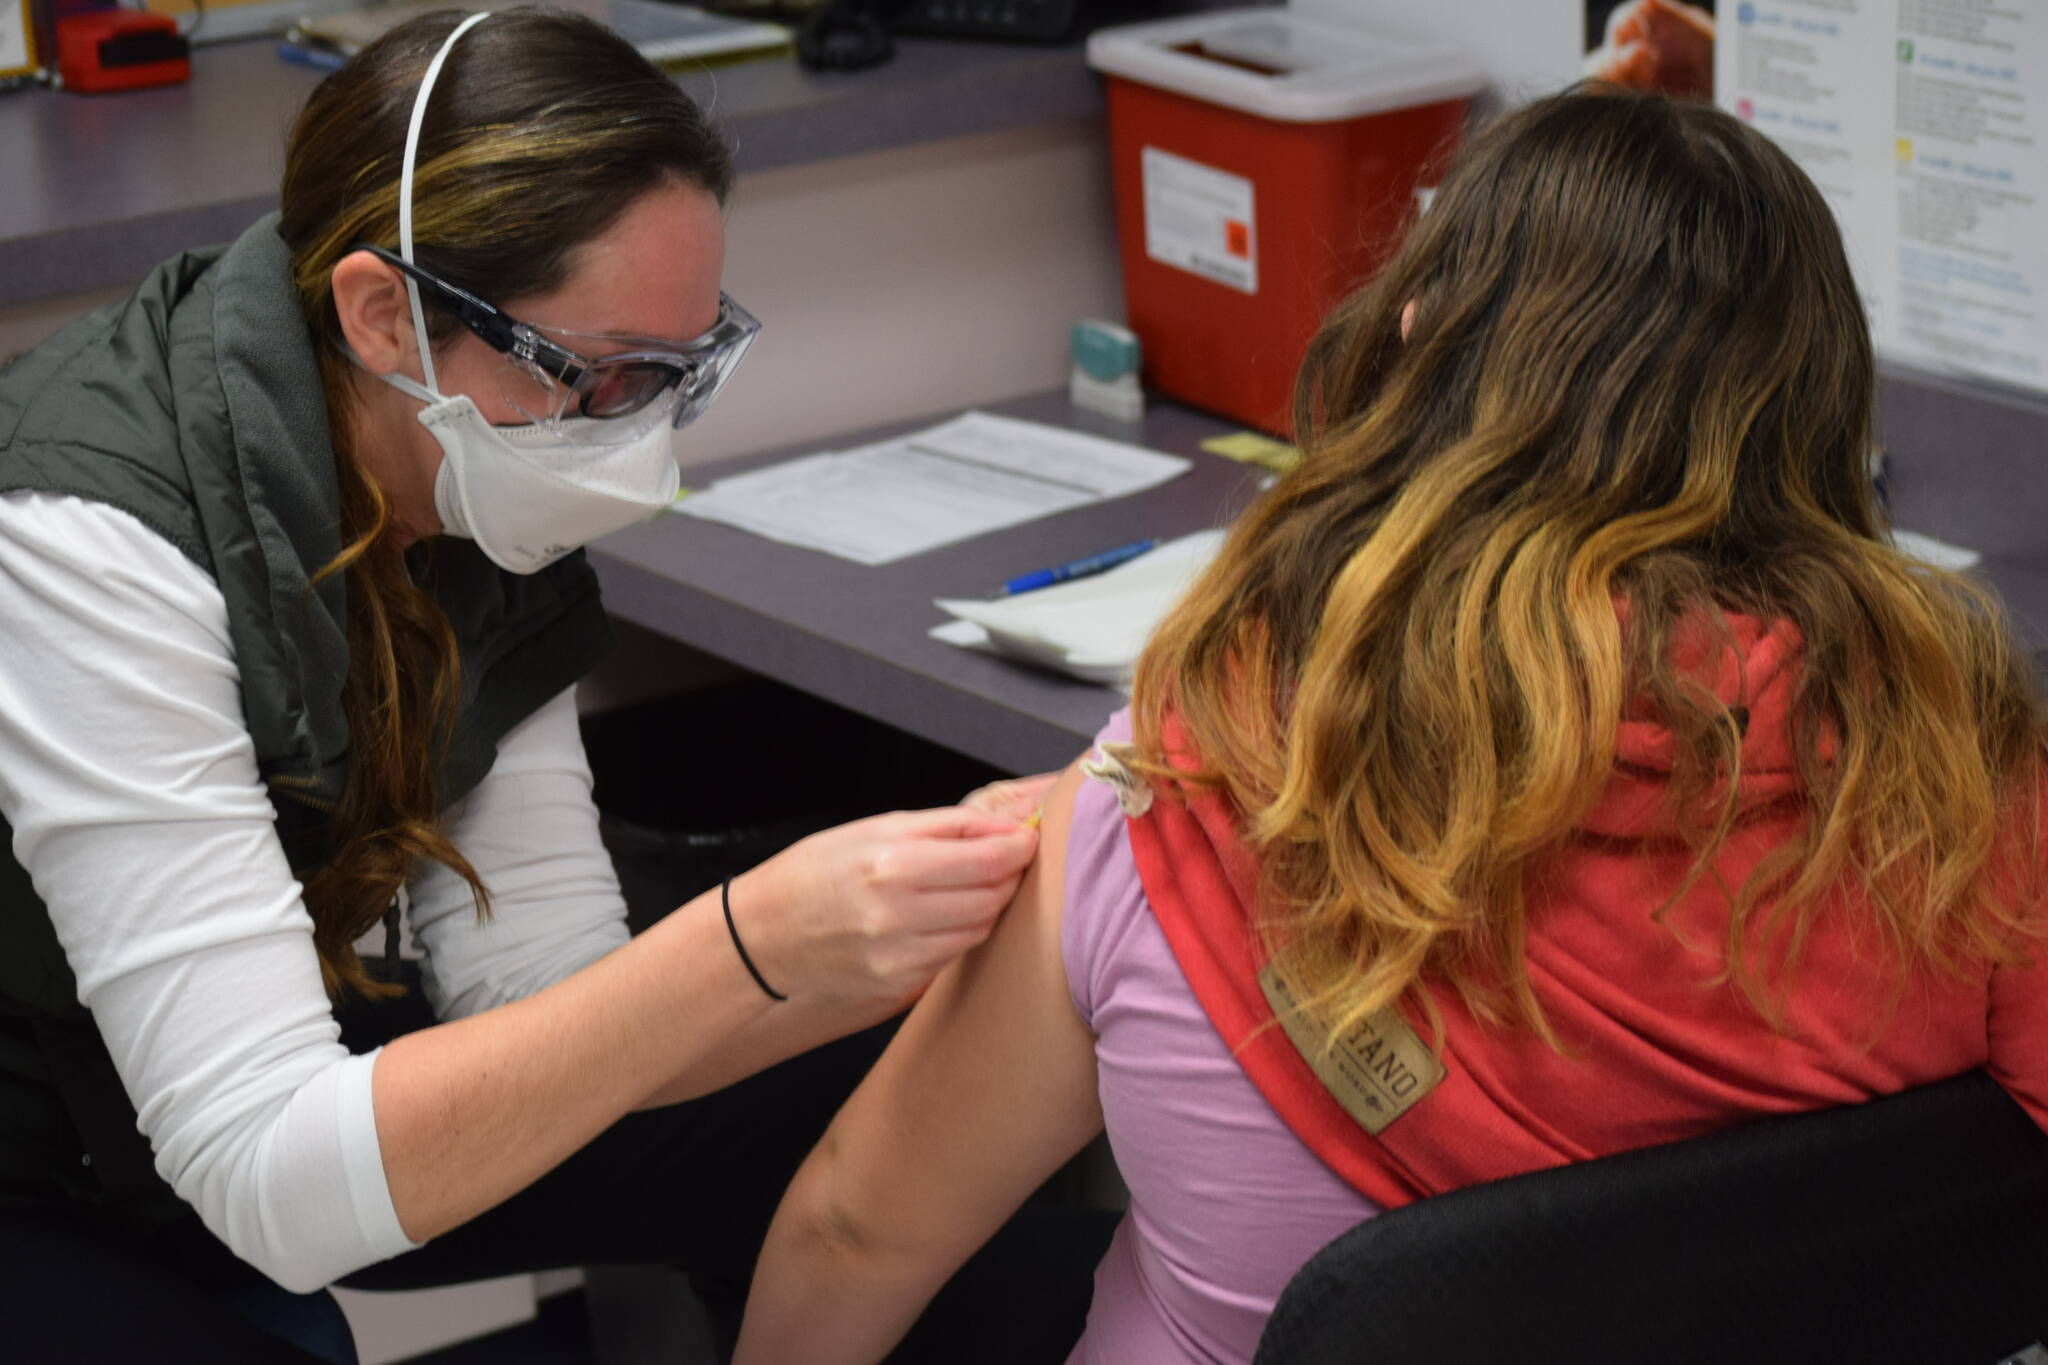 Nurse Sherra Pritchard gives Madyson Knudsen a bandage at the Kenai Public Health Center after the 10-year-old received her first COVID-19 vaccine on Friday, Nov. 5, 2021. (Camille Botello/Peninsula Clarion)